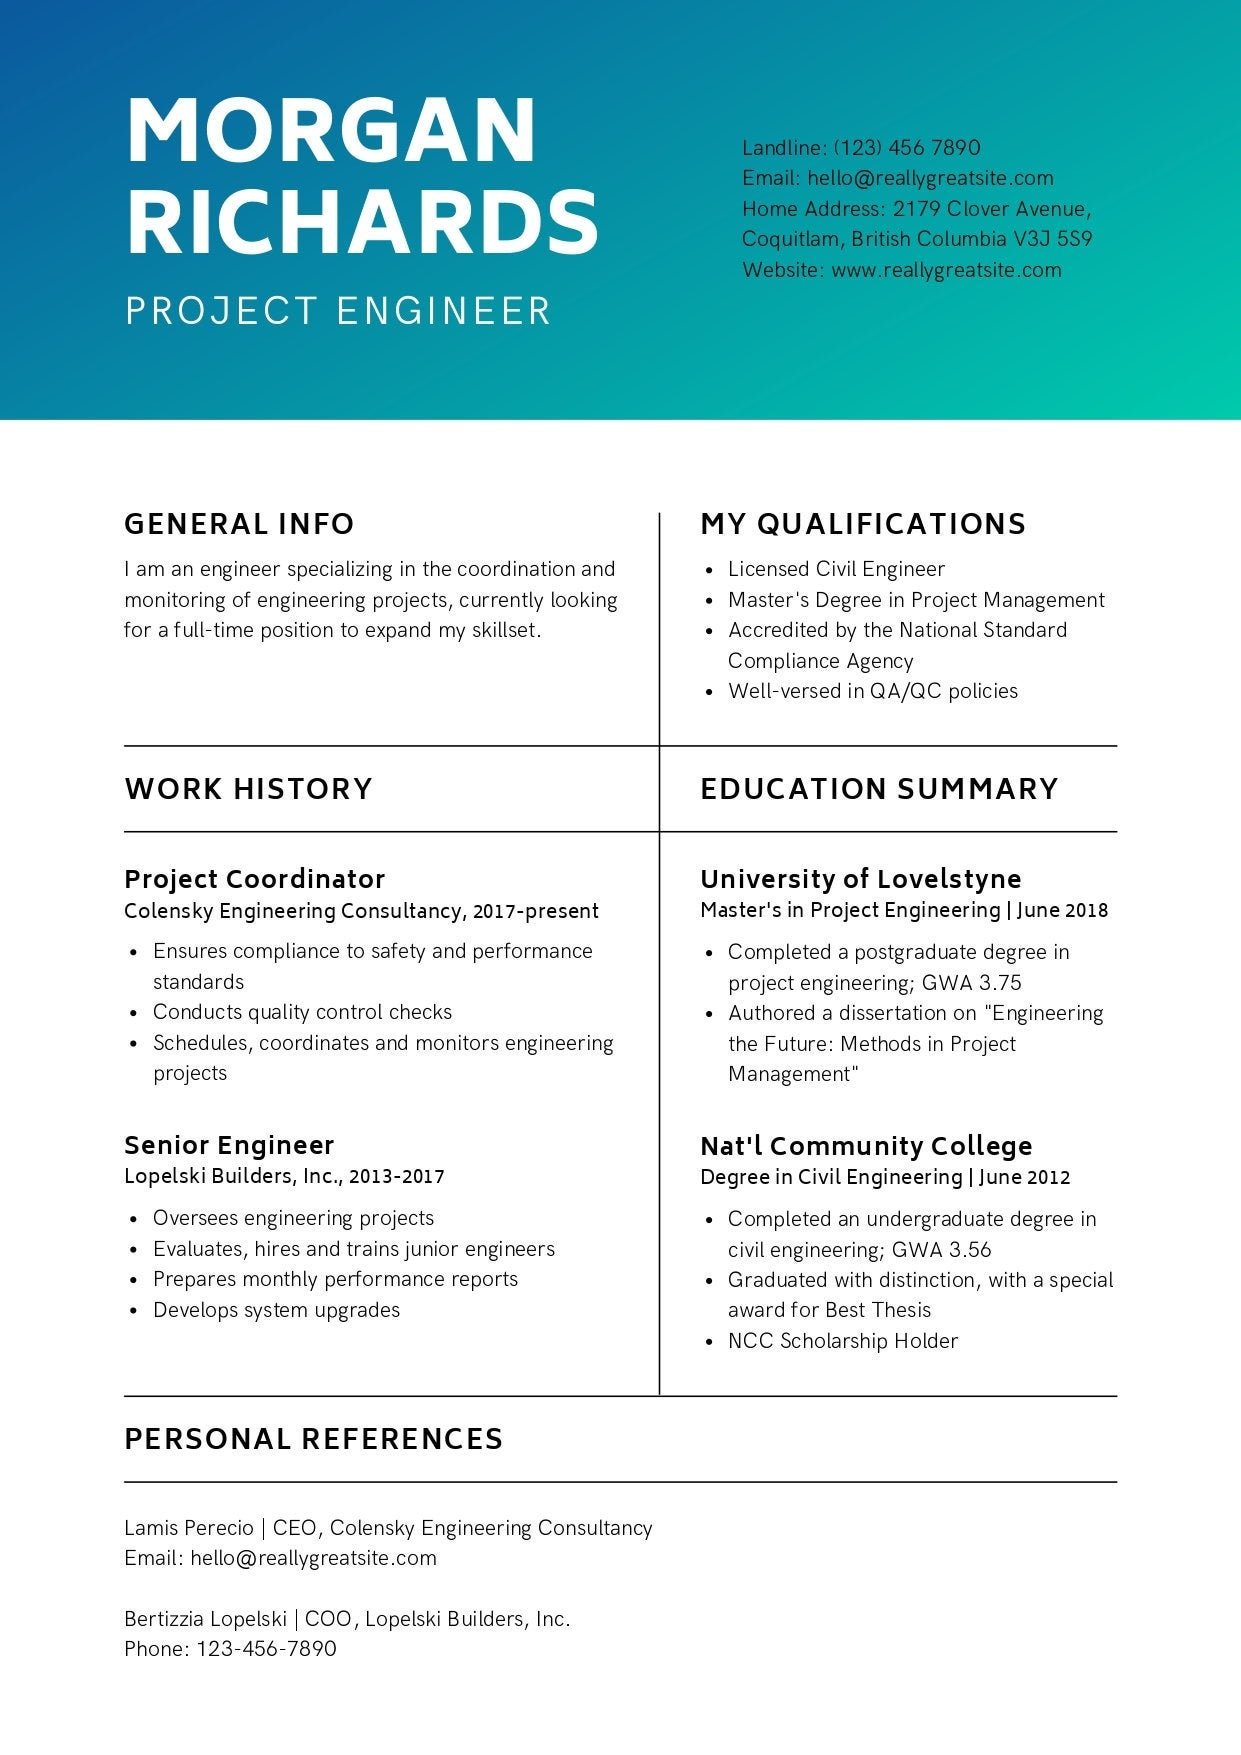 Canva Resume Template. Clean resume template and CV design.